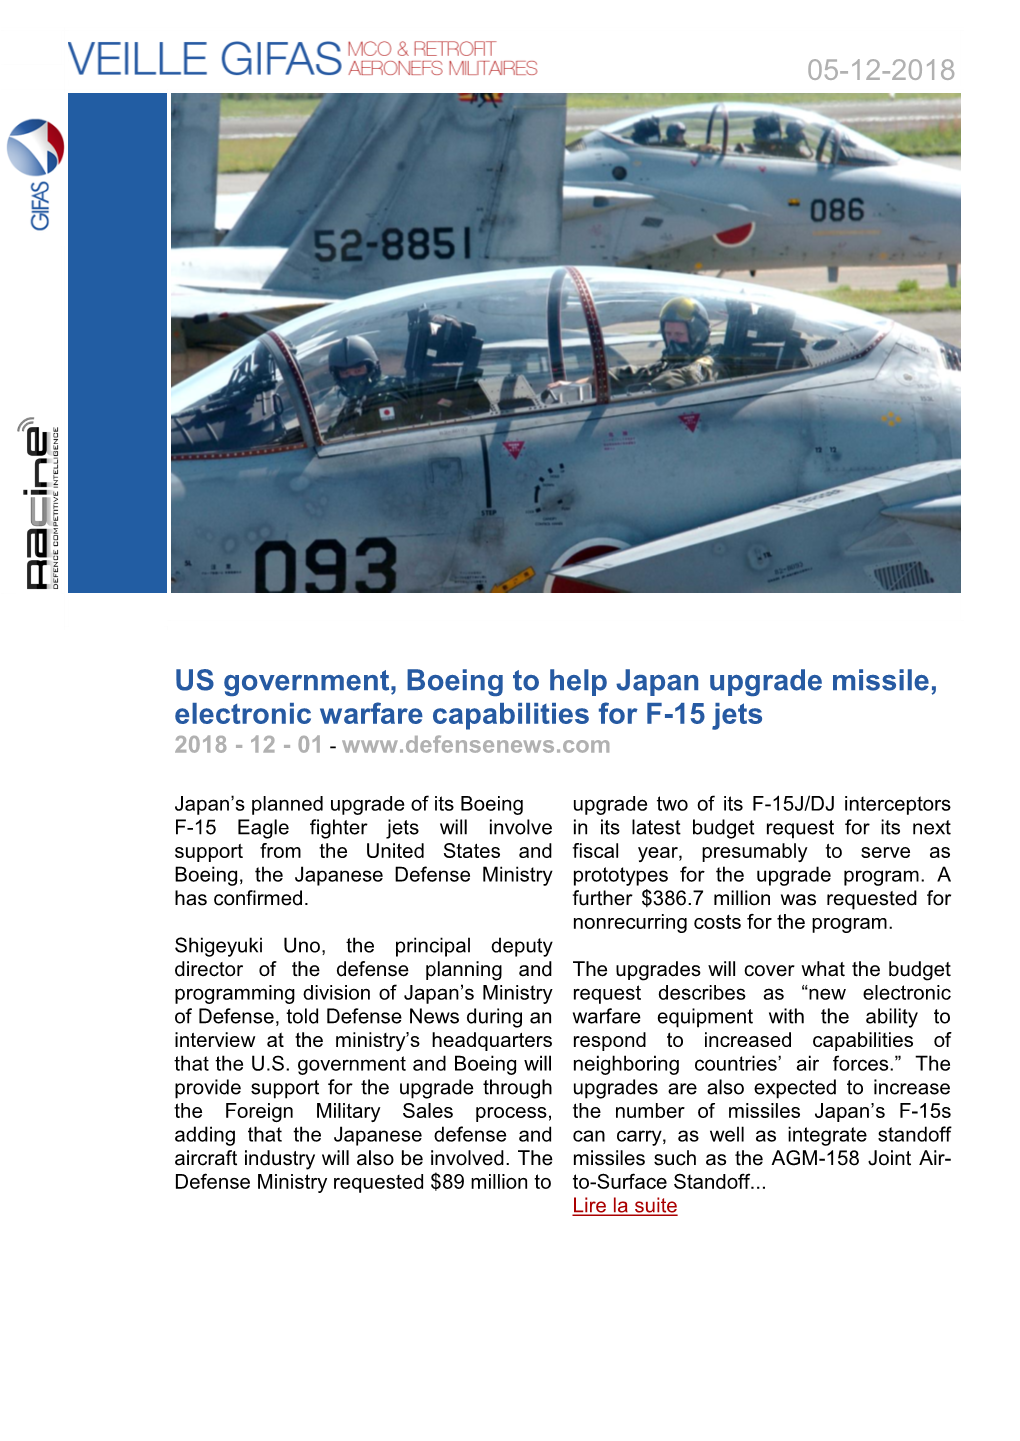 05-12-2018 US Government, Boeing to Help Japan Upgrade Missile